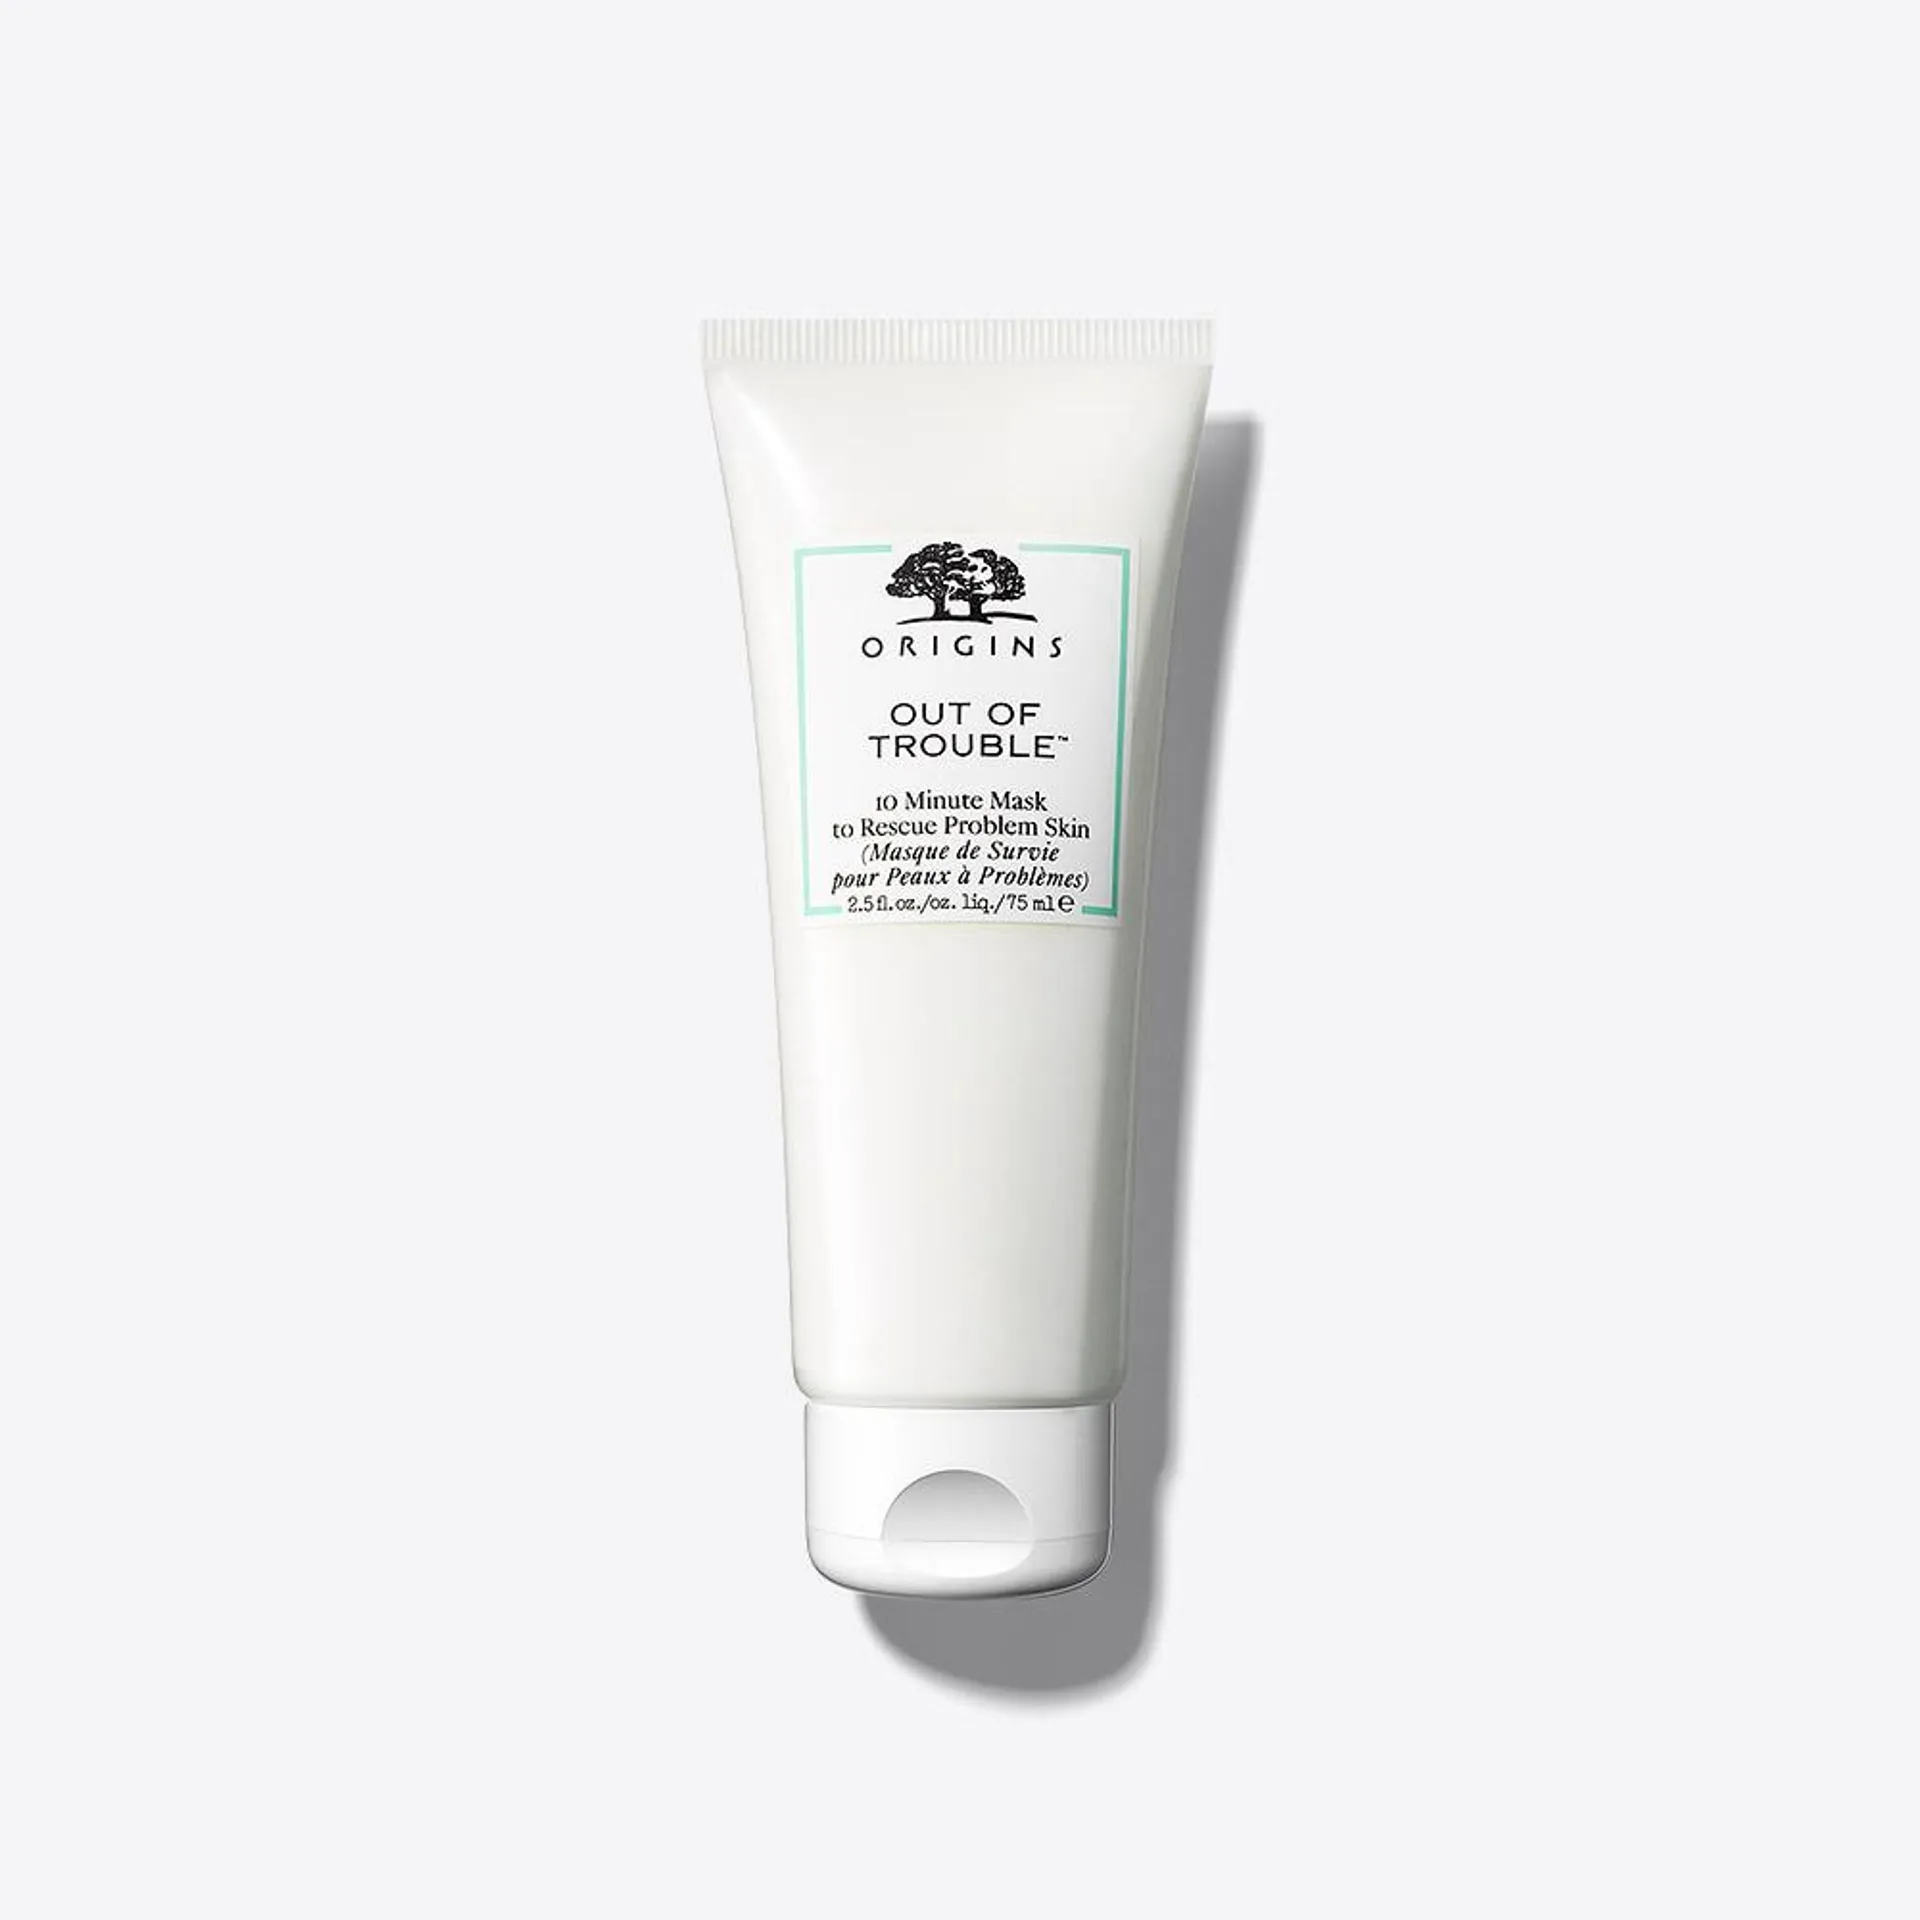 10 Minute Mask to Rescue Problem Skin